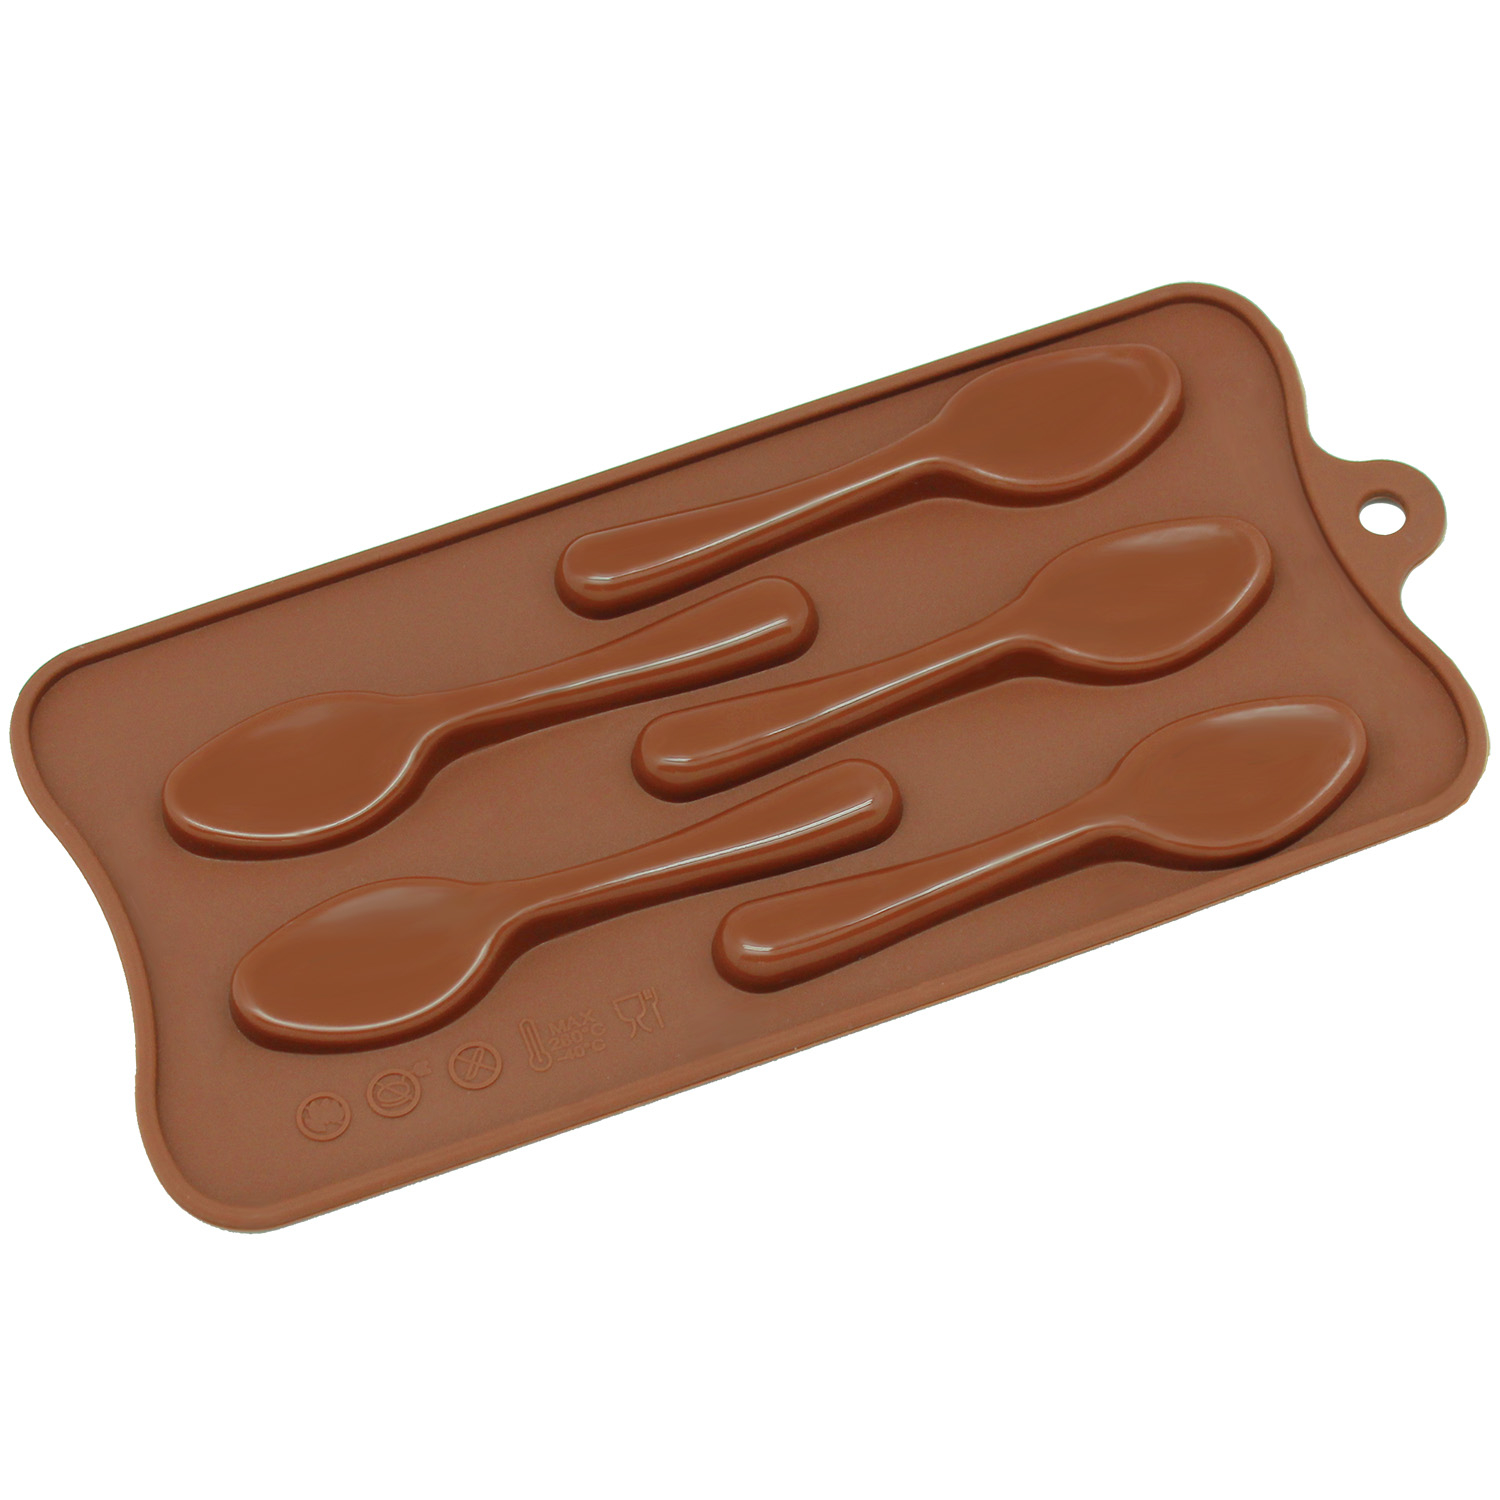 Freshware Silicone Mold, Chocolate Mold, Candy Mold, Ice Mold, Soap Mold for Chocolate, Candy and Gummy, Spoon, 5-Cavity